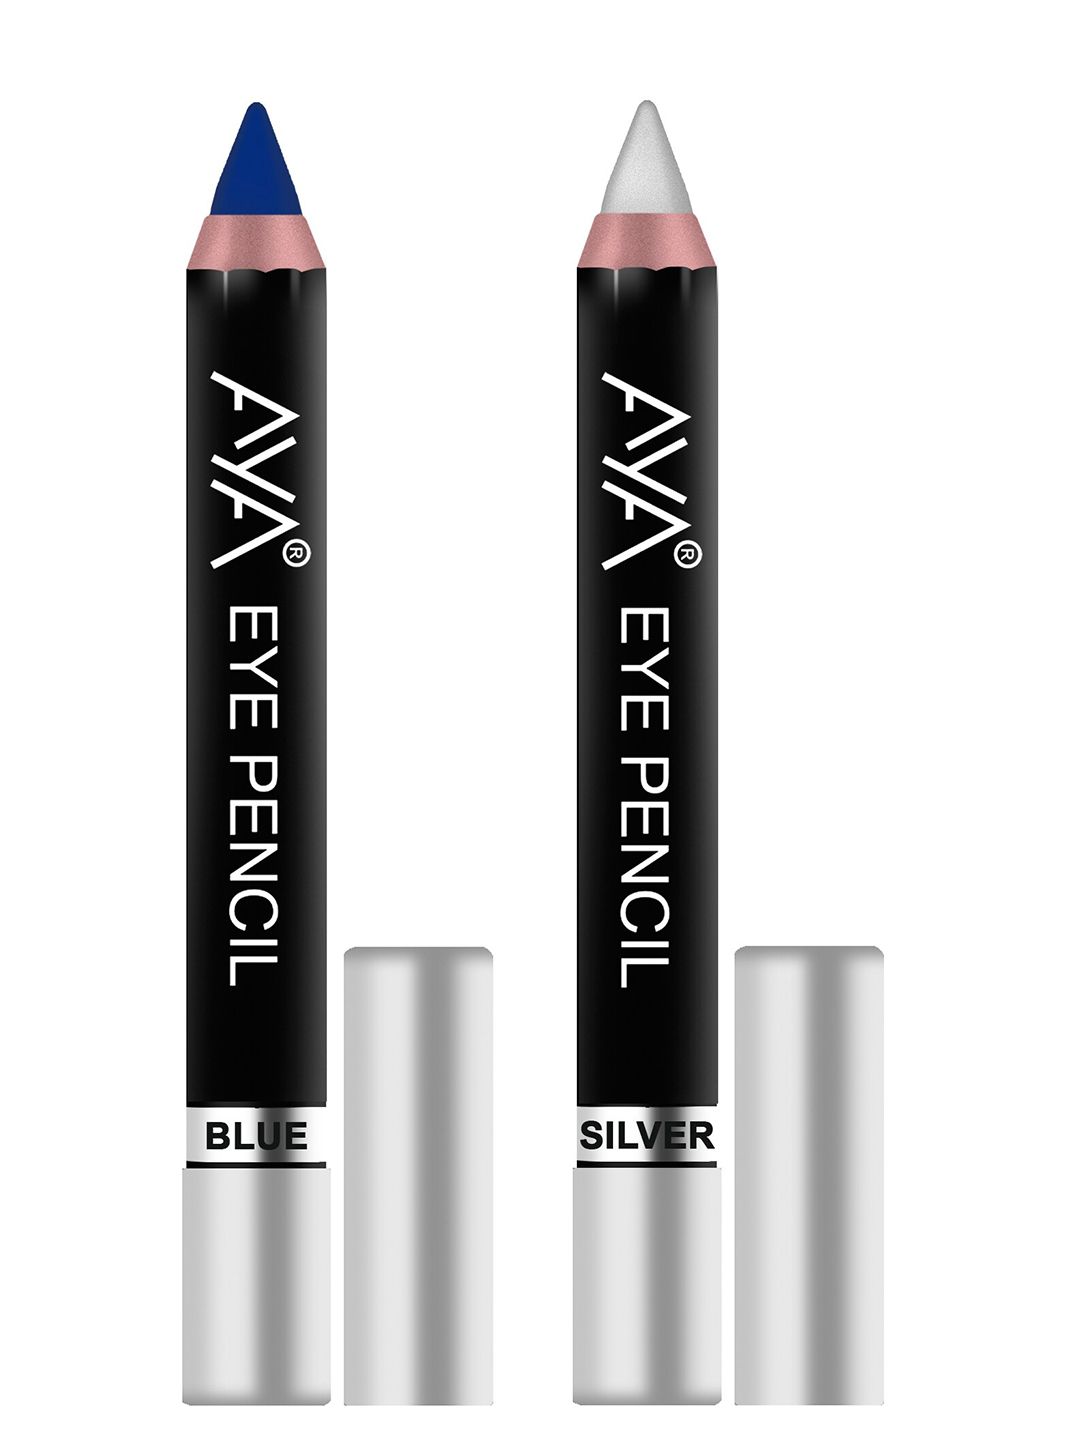 AYA Set of 2 Eye Liner Kajals Pencils in Blue and Silver Price in India